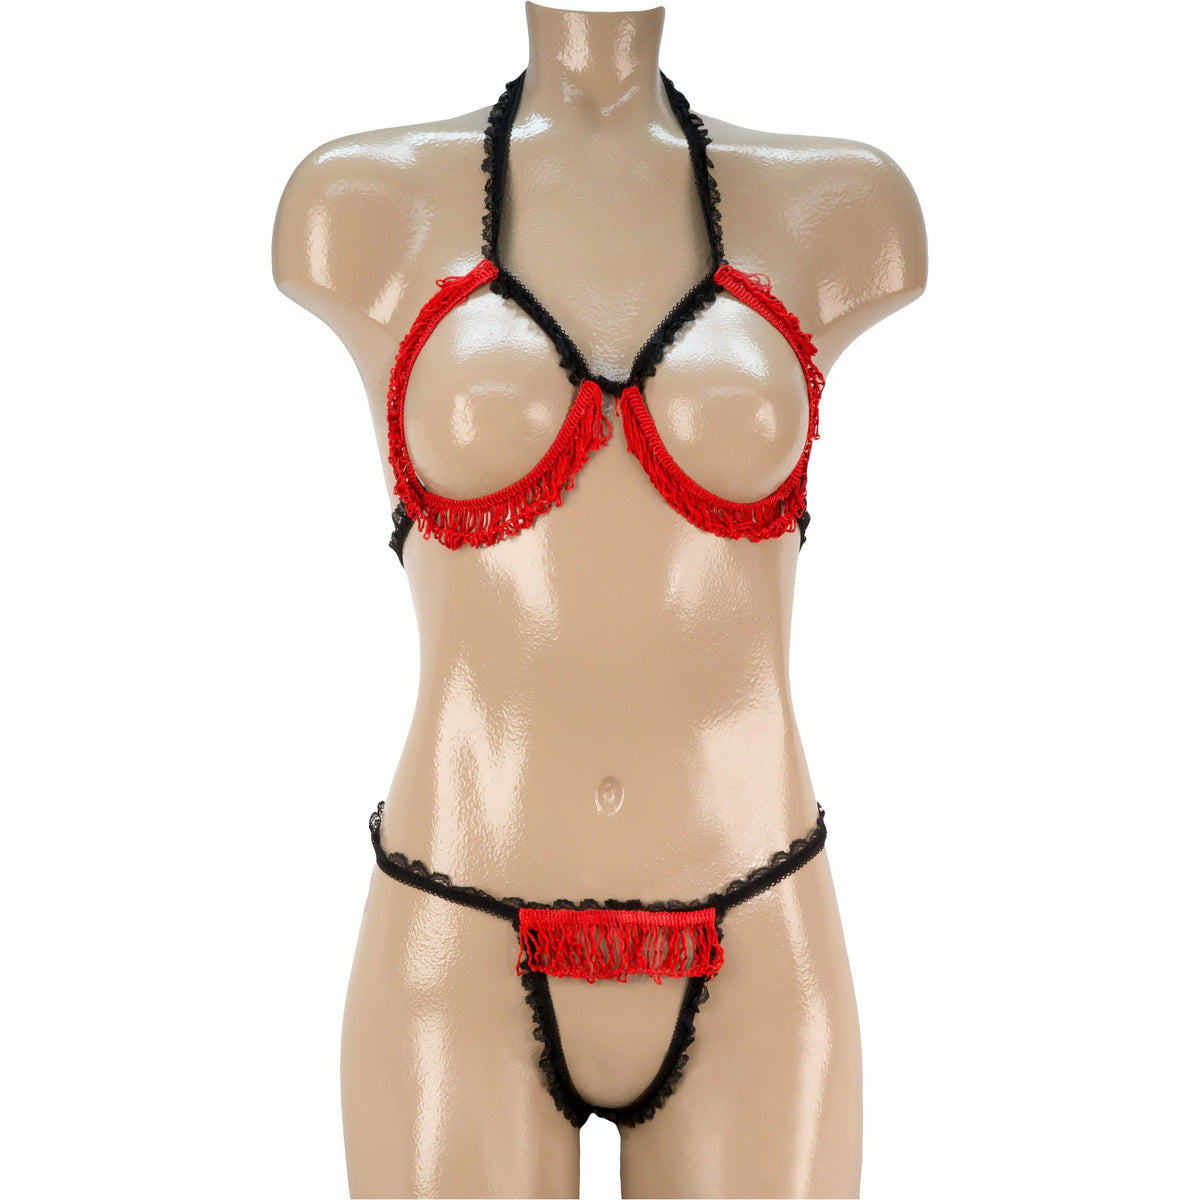 Sexy 2 PC Open Bra &amp; Crotchless Panty Set - Black with Red - O/S